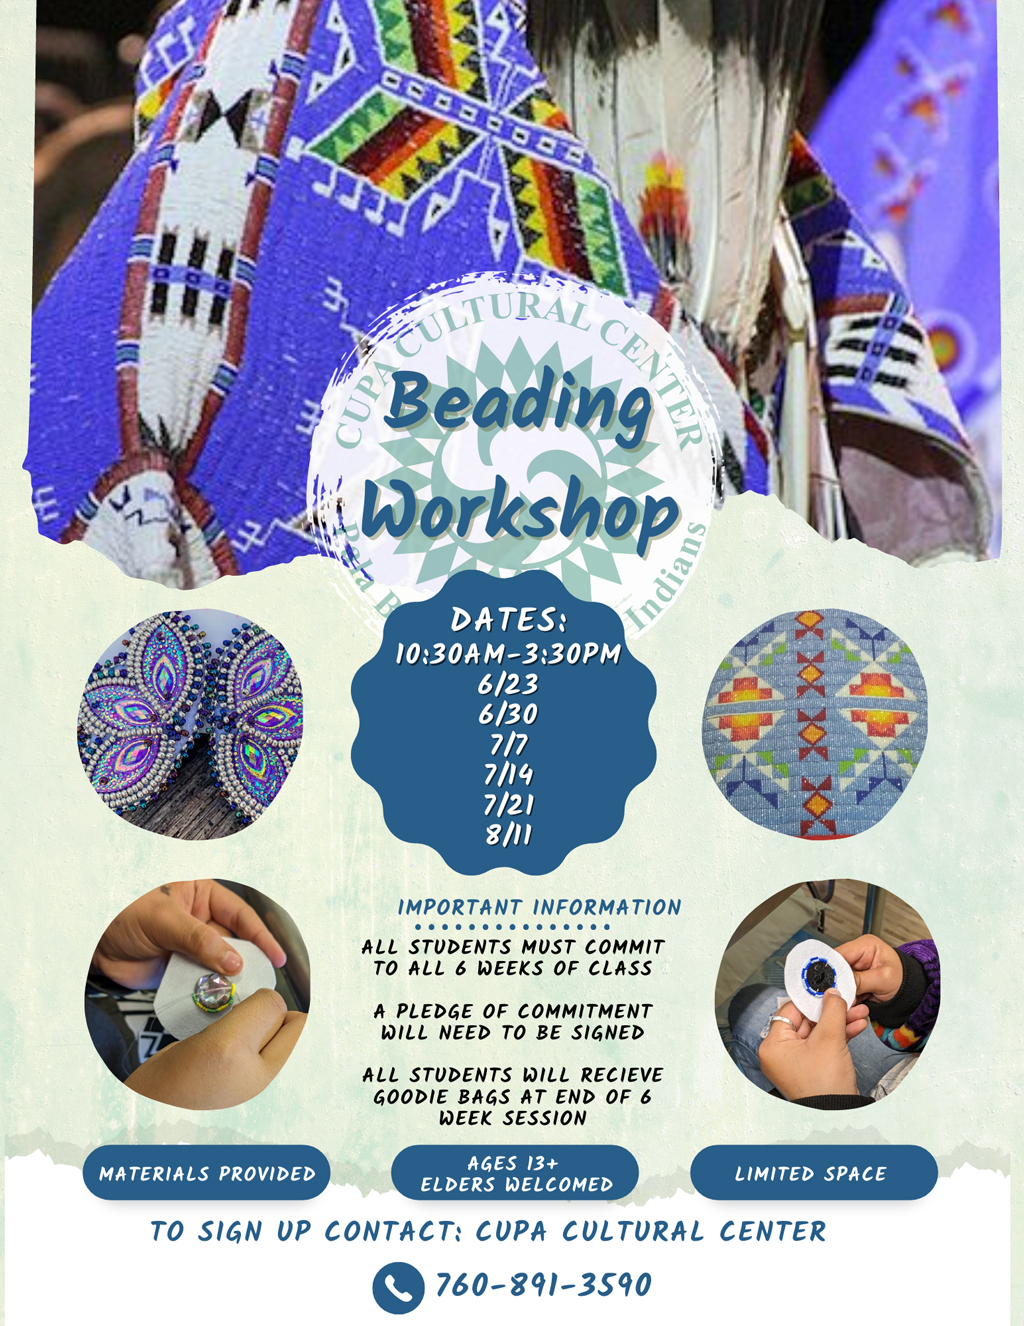 Pala Band California Cupa Cultural Center Event Beading Workshop